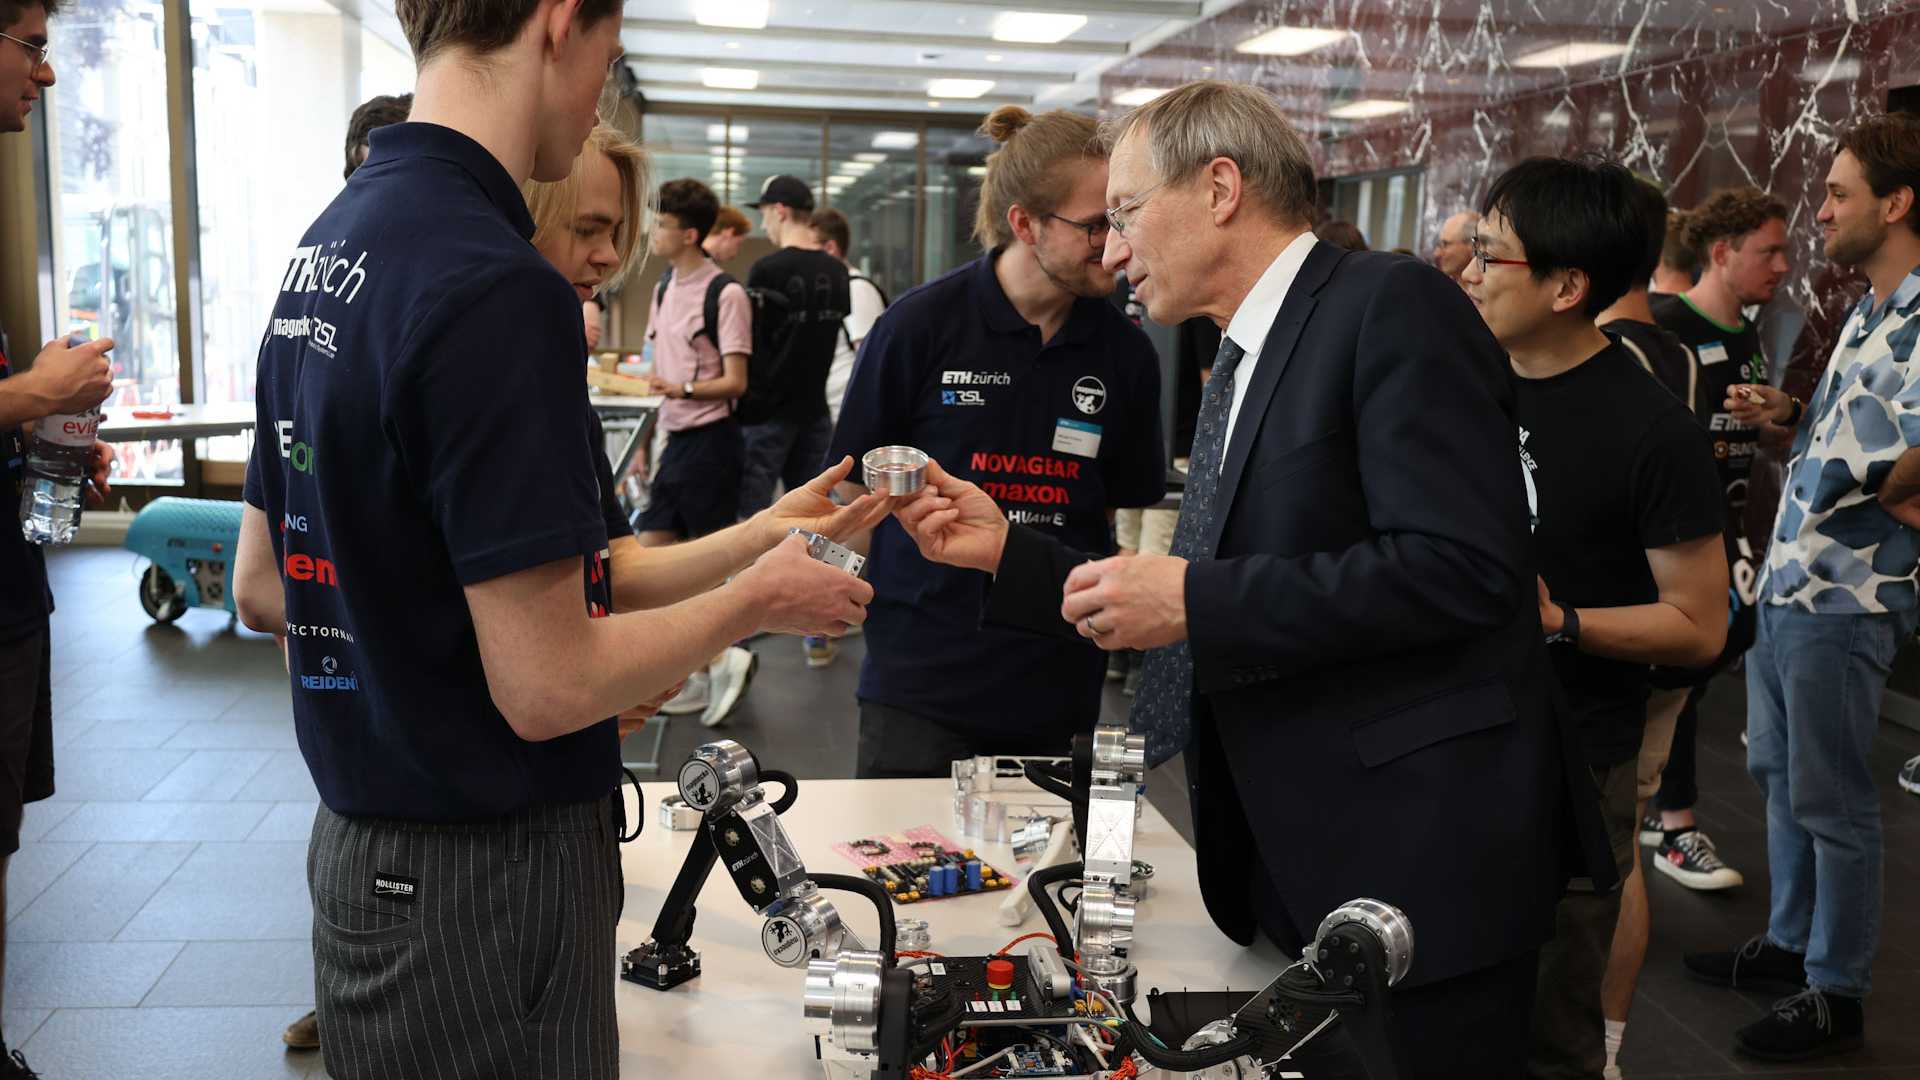 Professor Wegener admires a single component at the booth, other guests are in the background